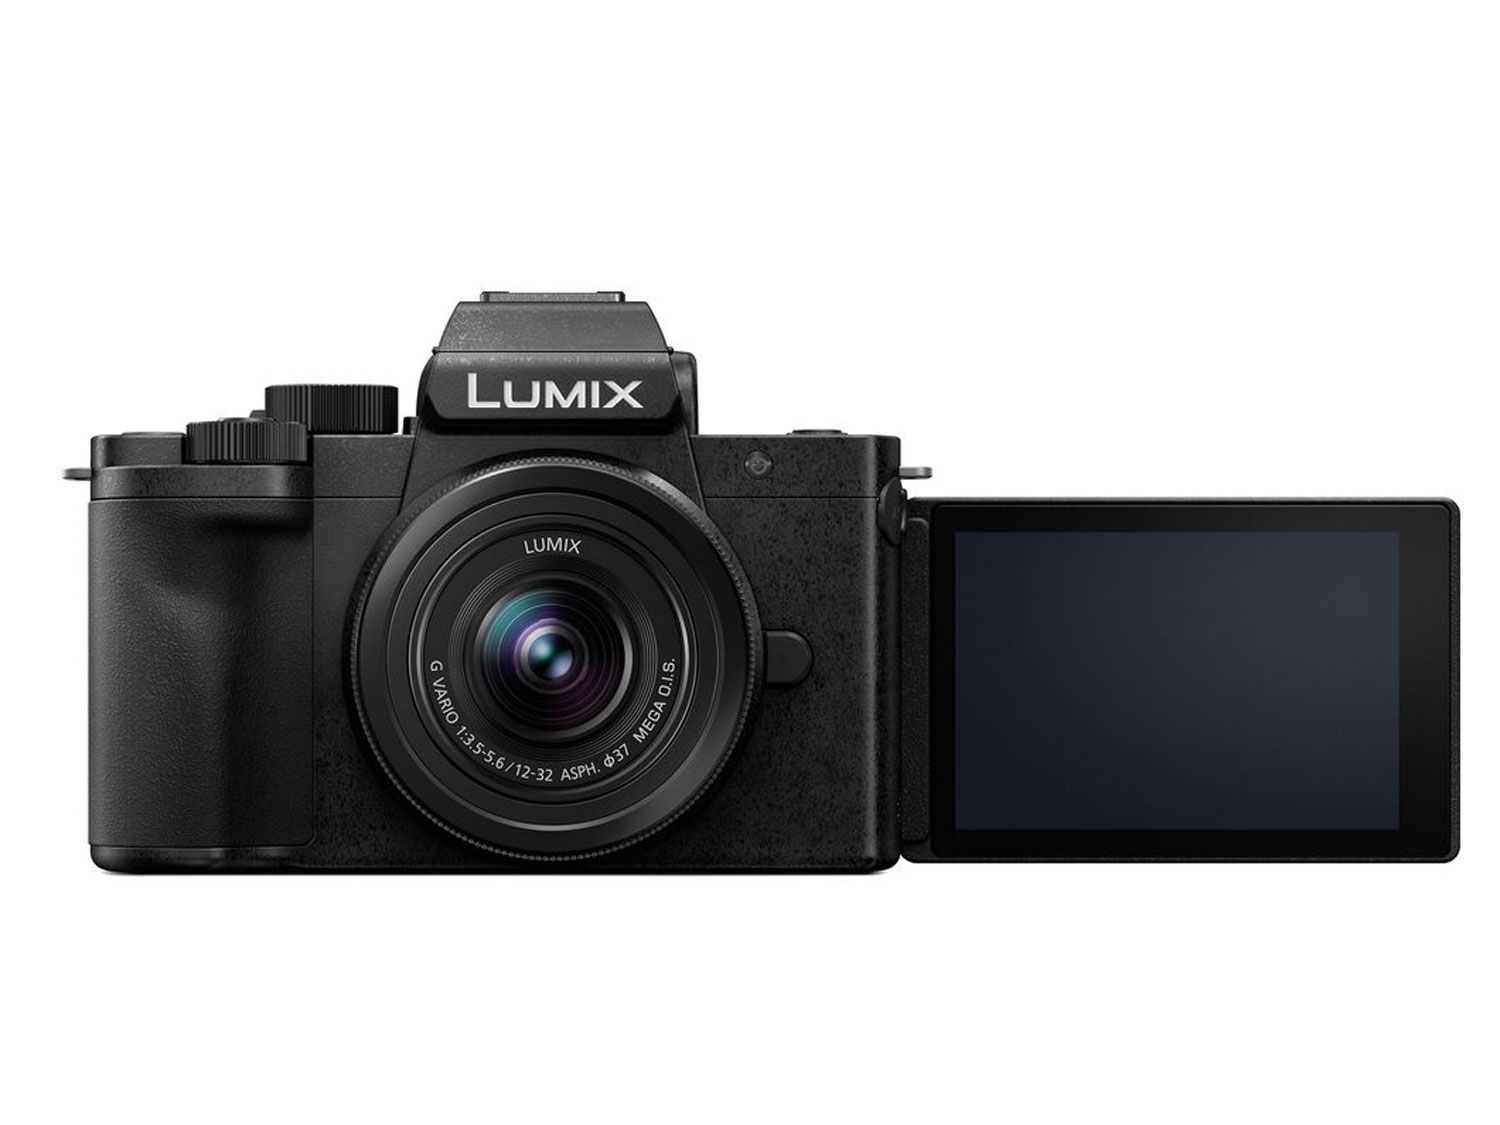 Panasonic’s new vlogging camera uses facial recognition tracking to isolate the sound of your voice